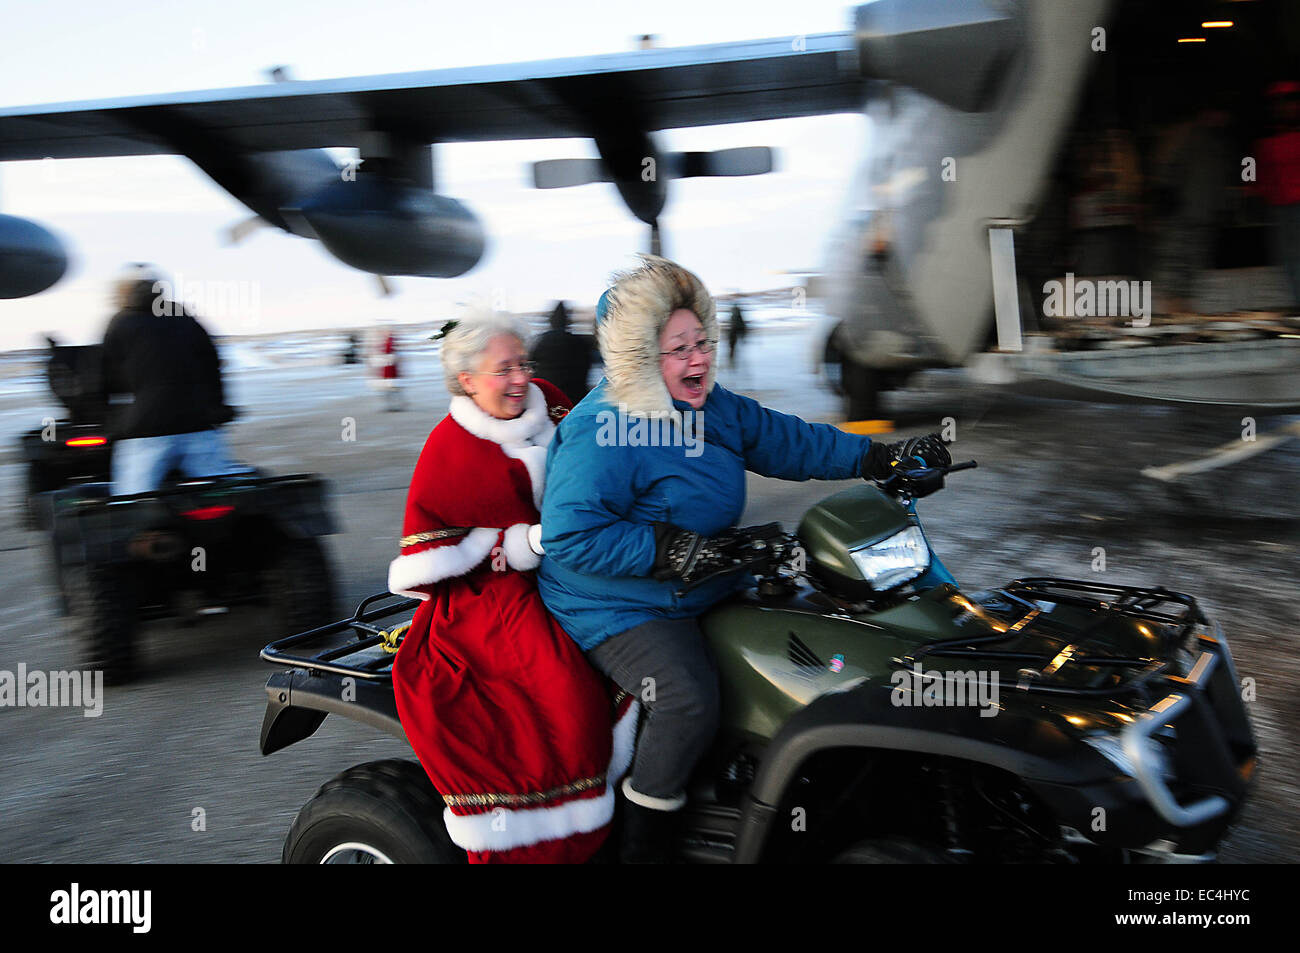 Mrs. Santa Claus rides off on a ATV during a visit to a remote Inuit village as part of Operation Santa Claus December 16, 2009 in Gambell, Alaska. Operation Santa Claus has delivered donated gifts to poor remote Alaskan villages by Air Force transport since 1951. Stock Photo